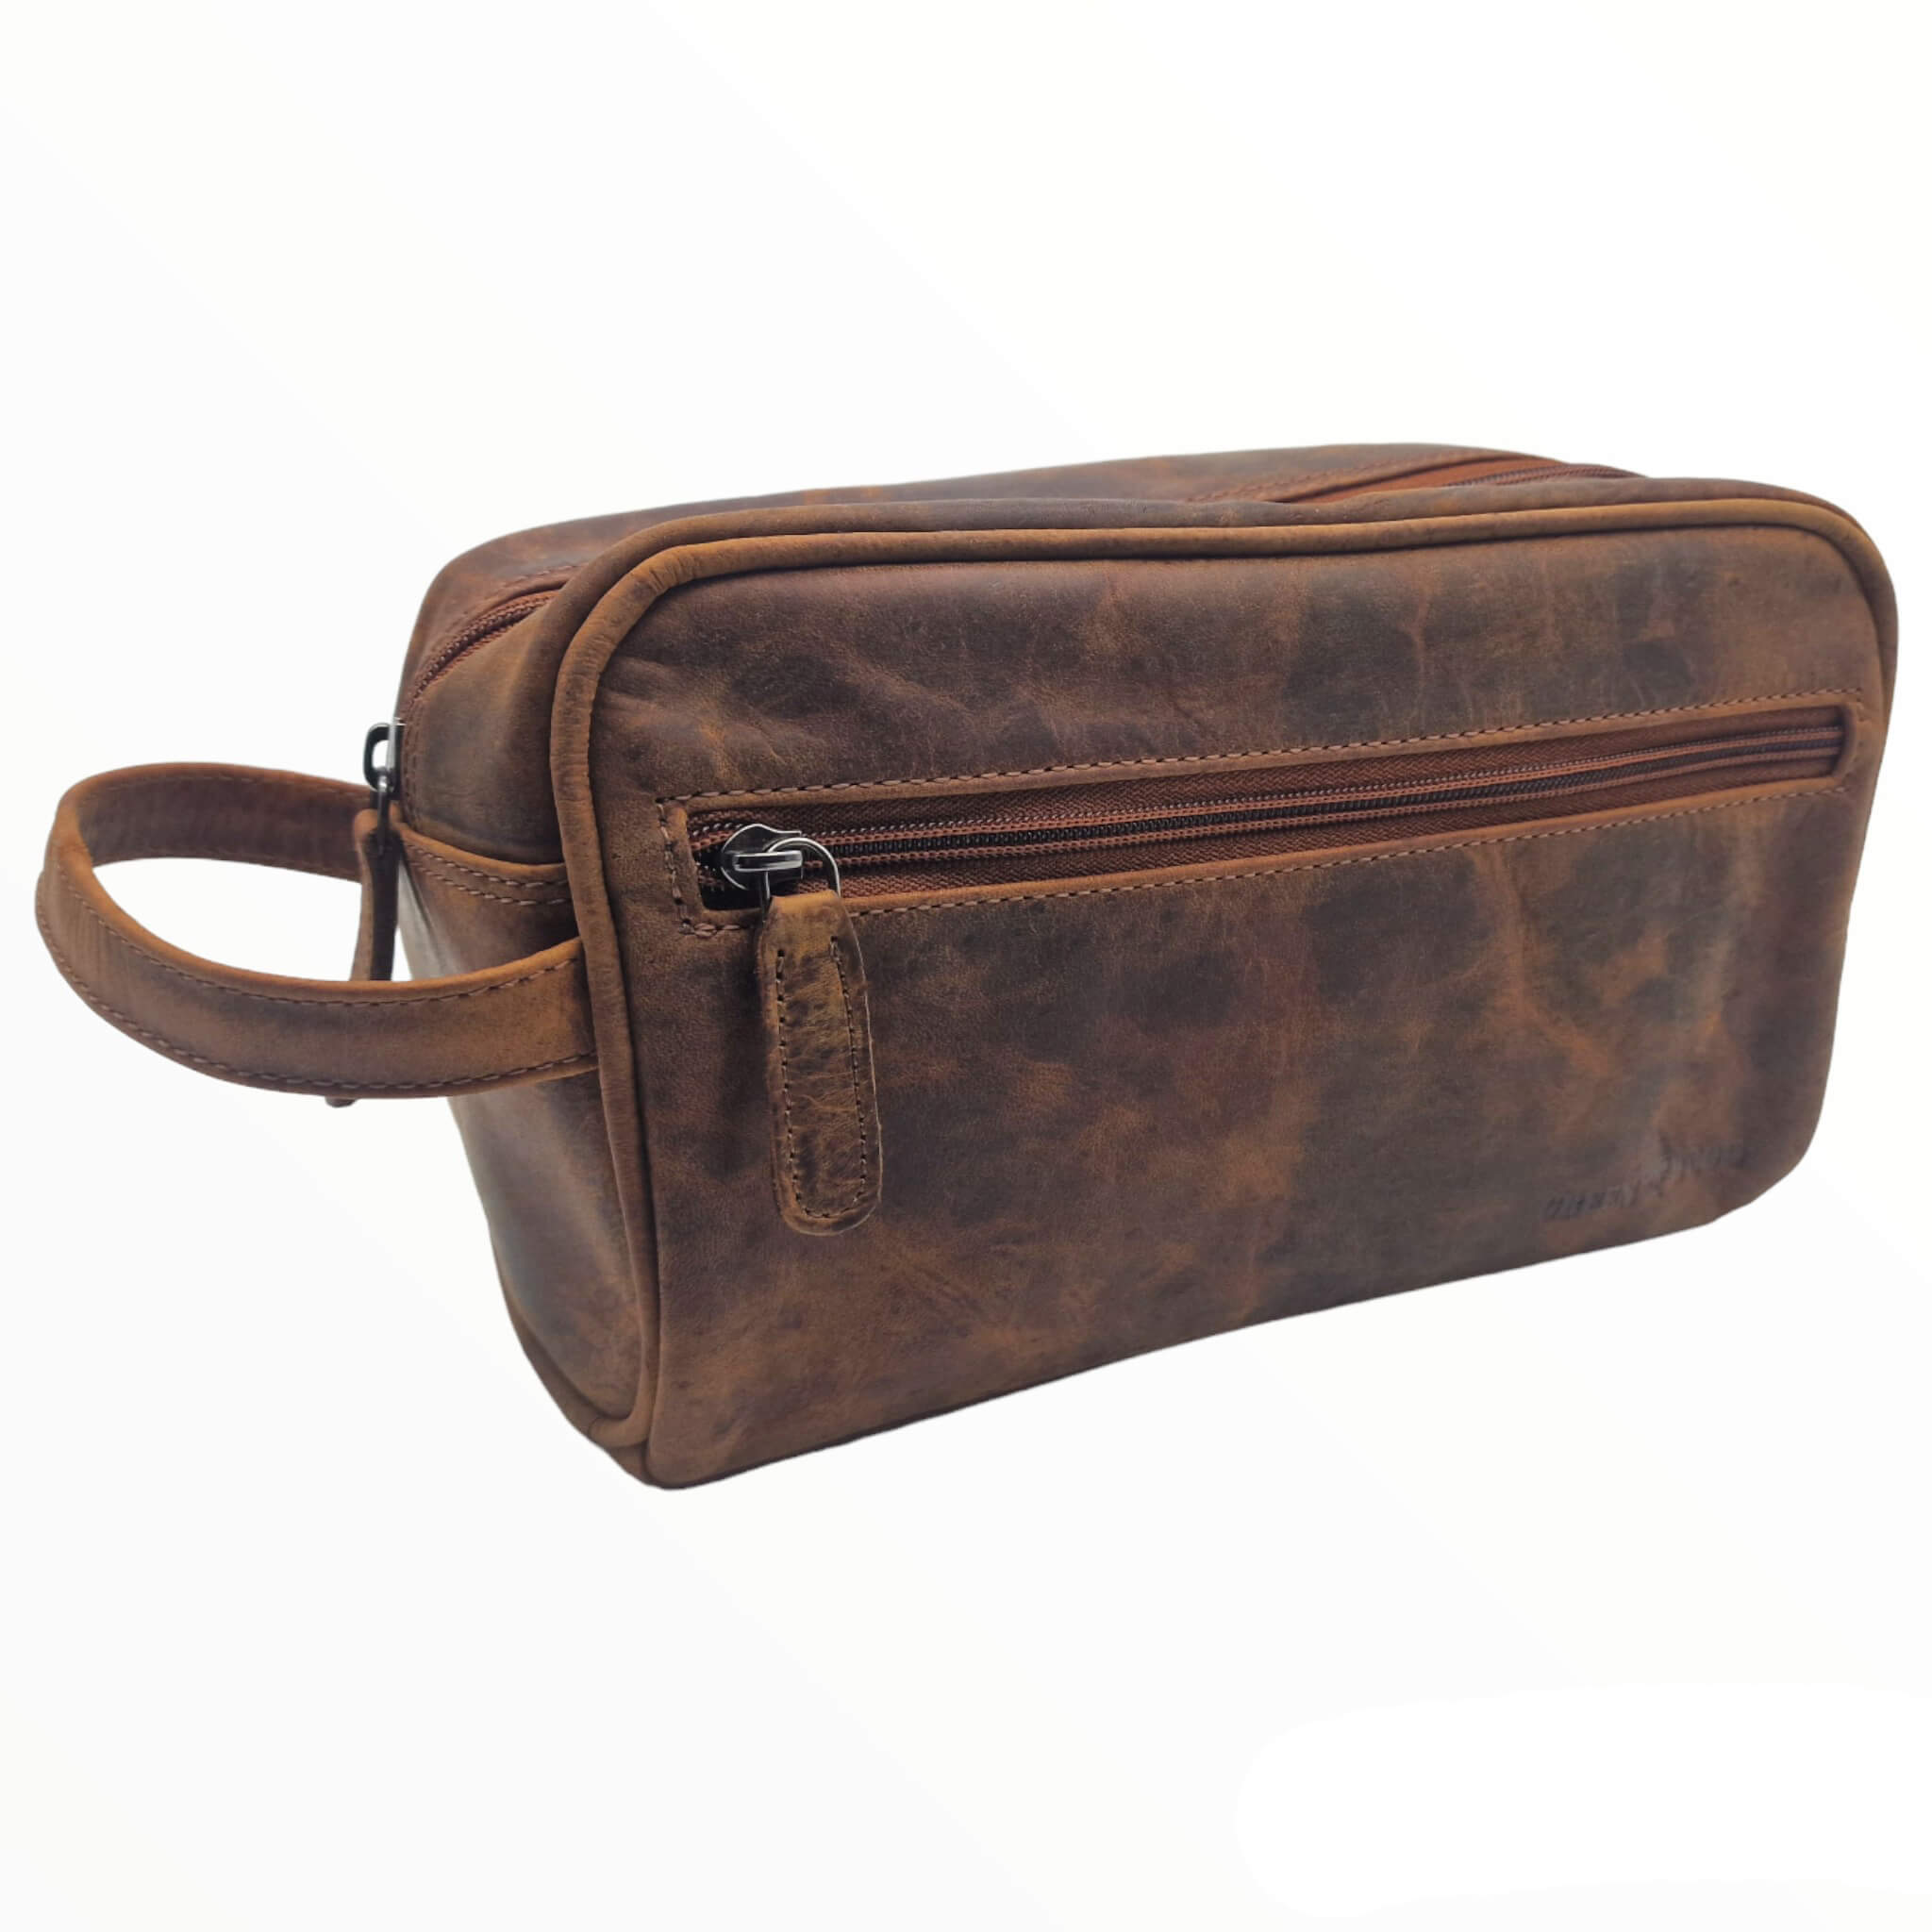 Amari Leather Toiletry Bag Men Wash Bag Women with Compartments